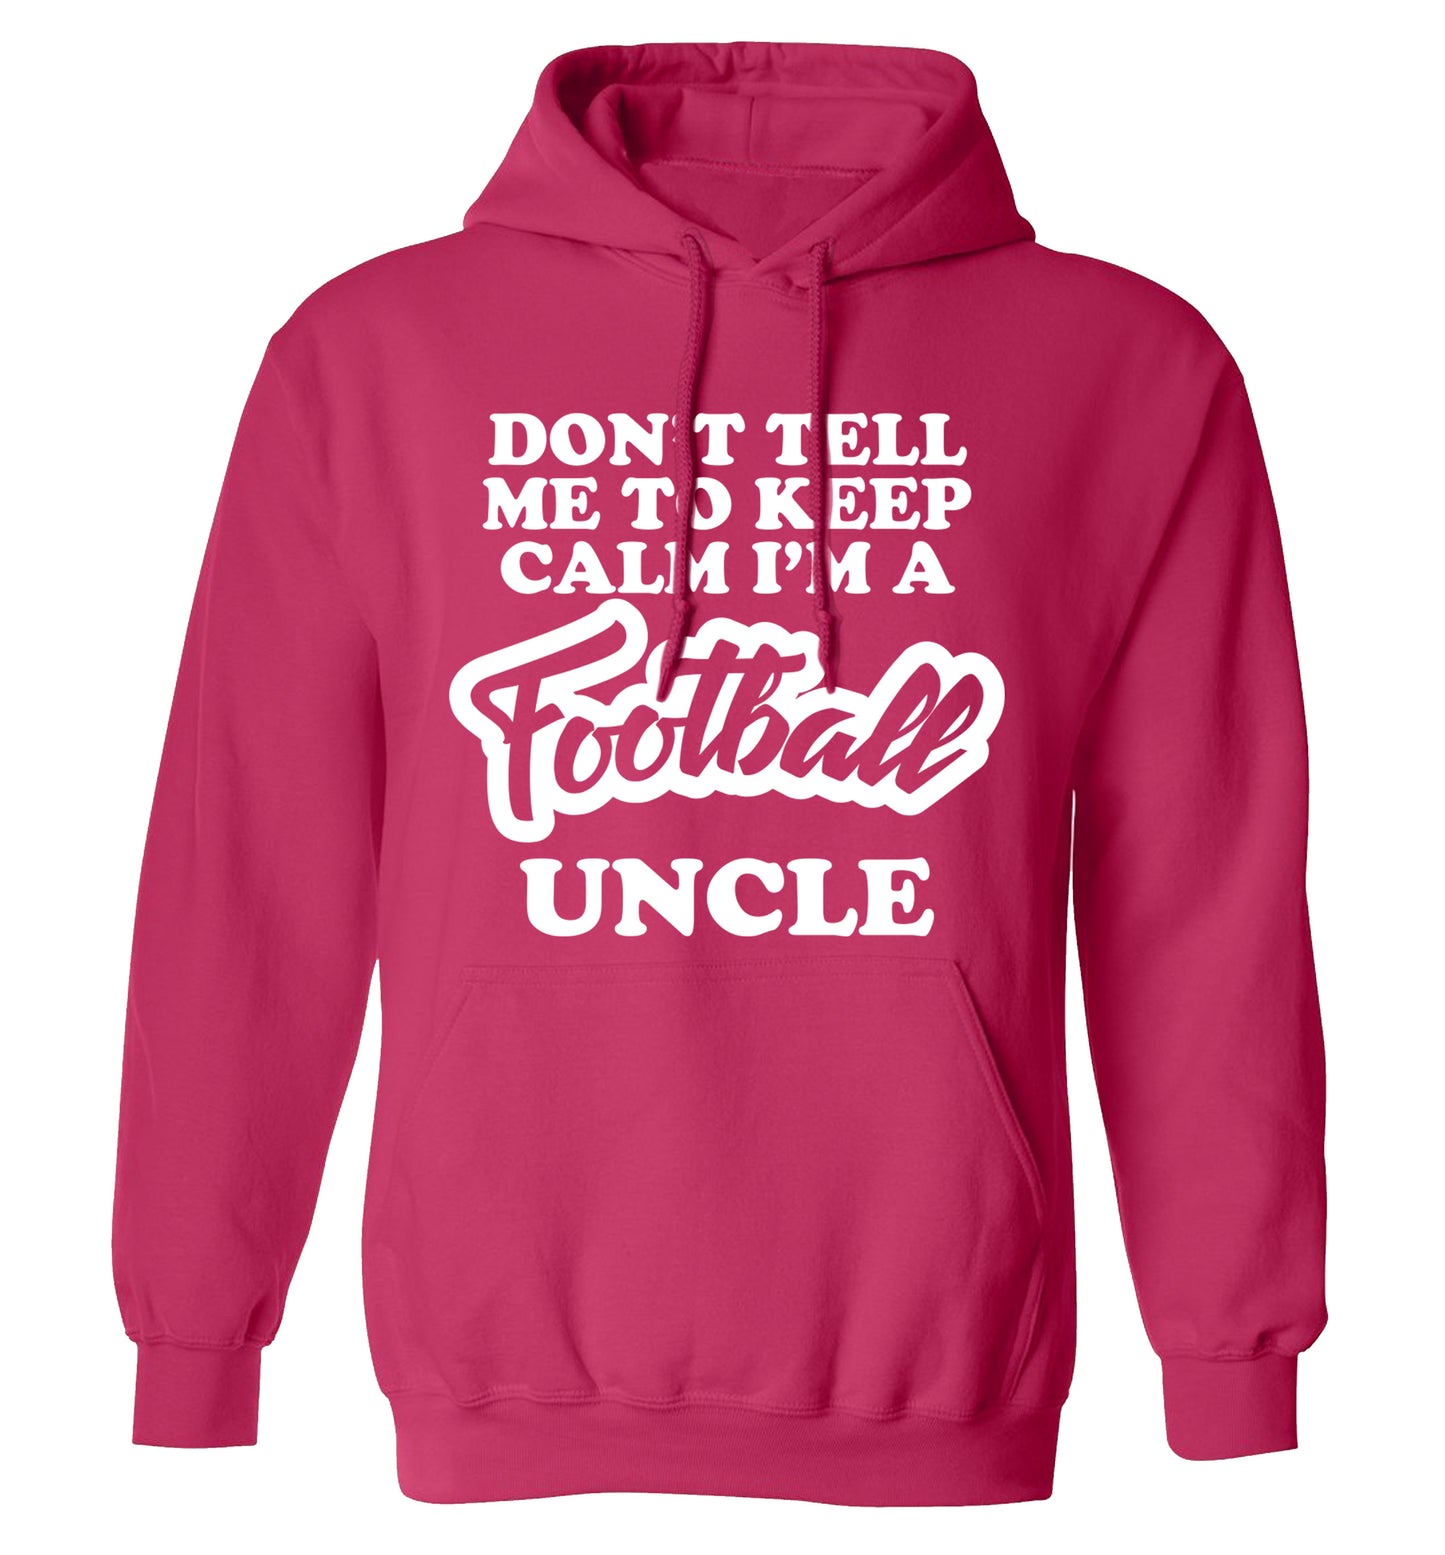 Worlds most amazing football uncle adults unisexpink hoodie 2XL